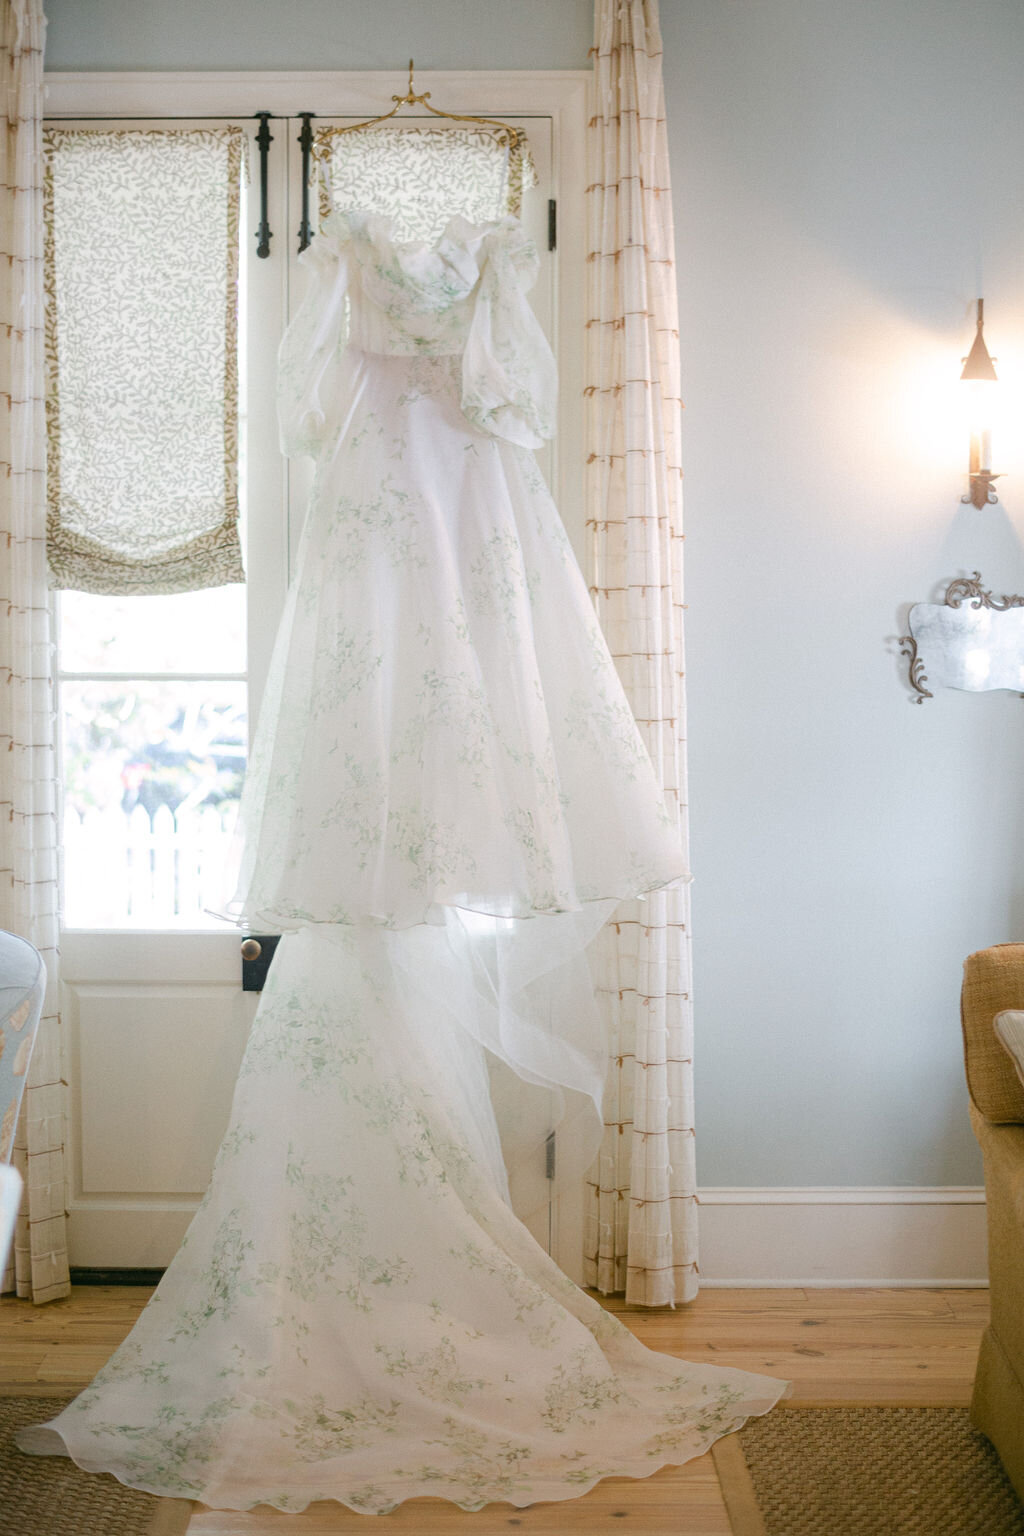 Bridal gown with floral patterns for a beach wedding in Florida